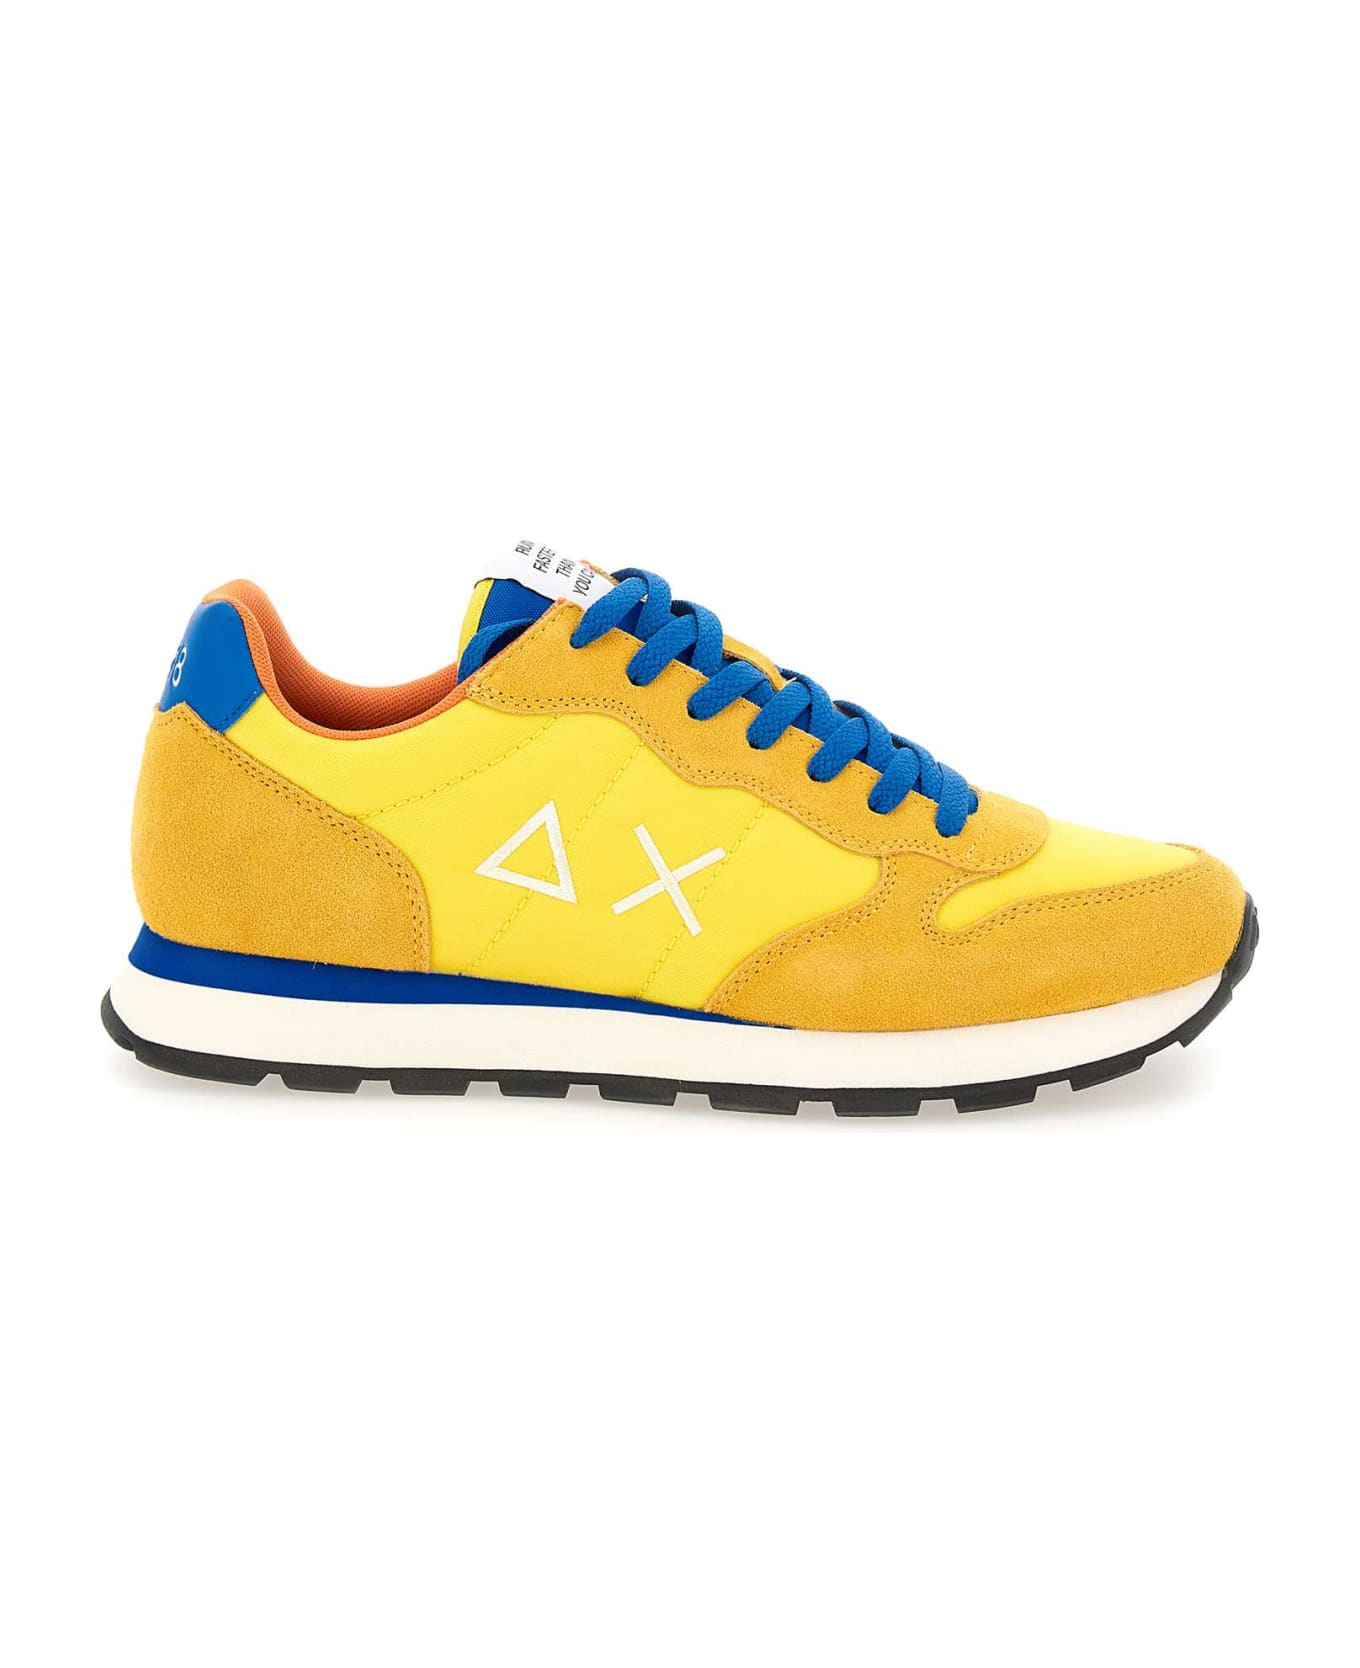 Sun 68 "tom Solid" Sneakers - YELLOW